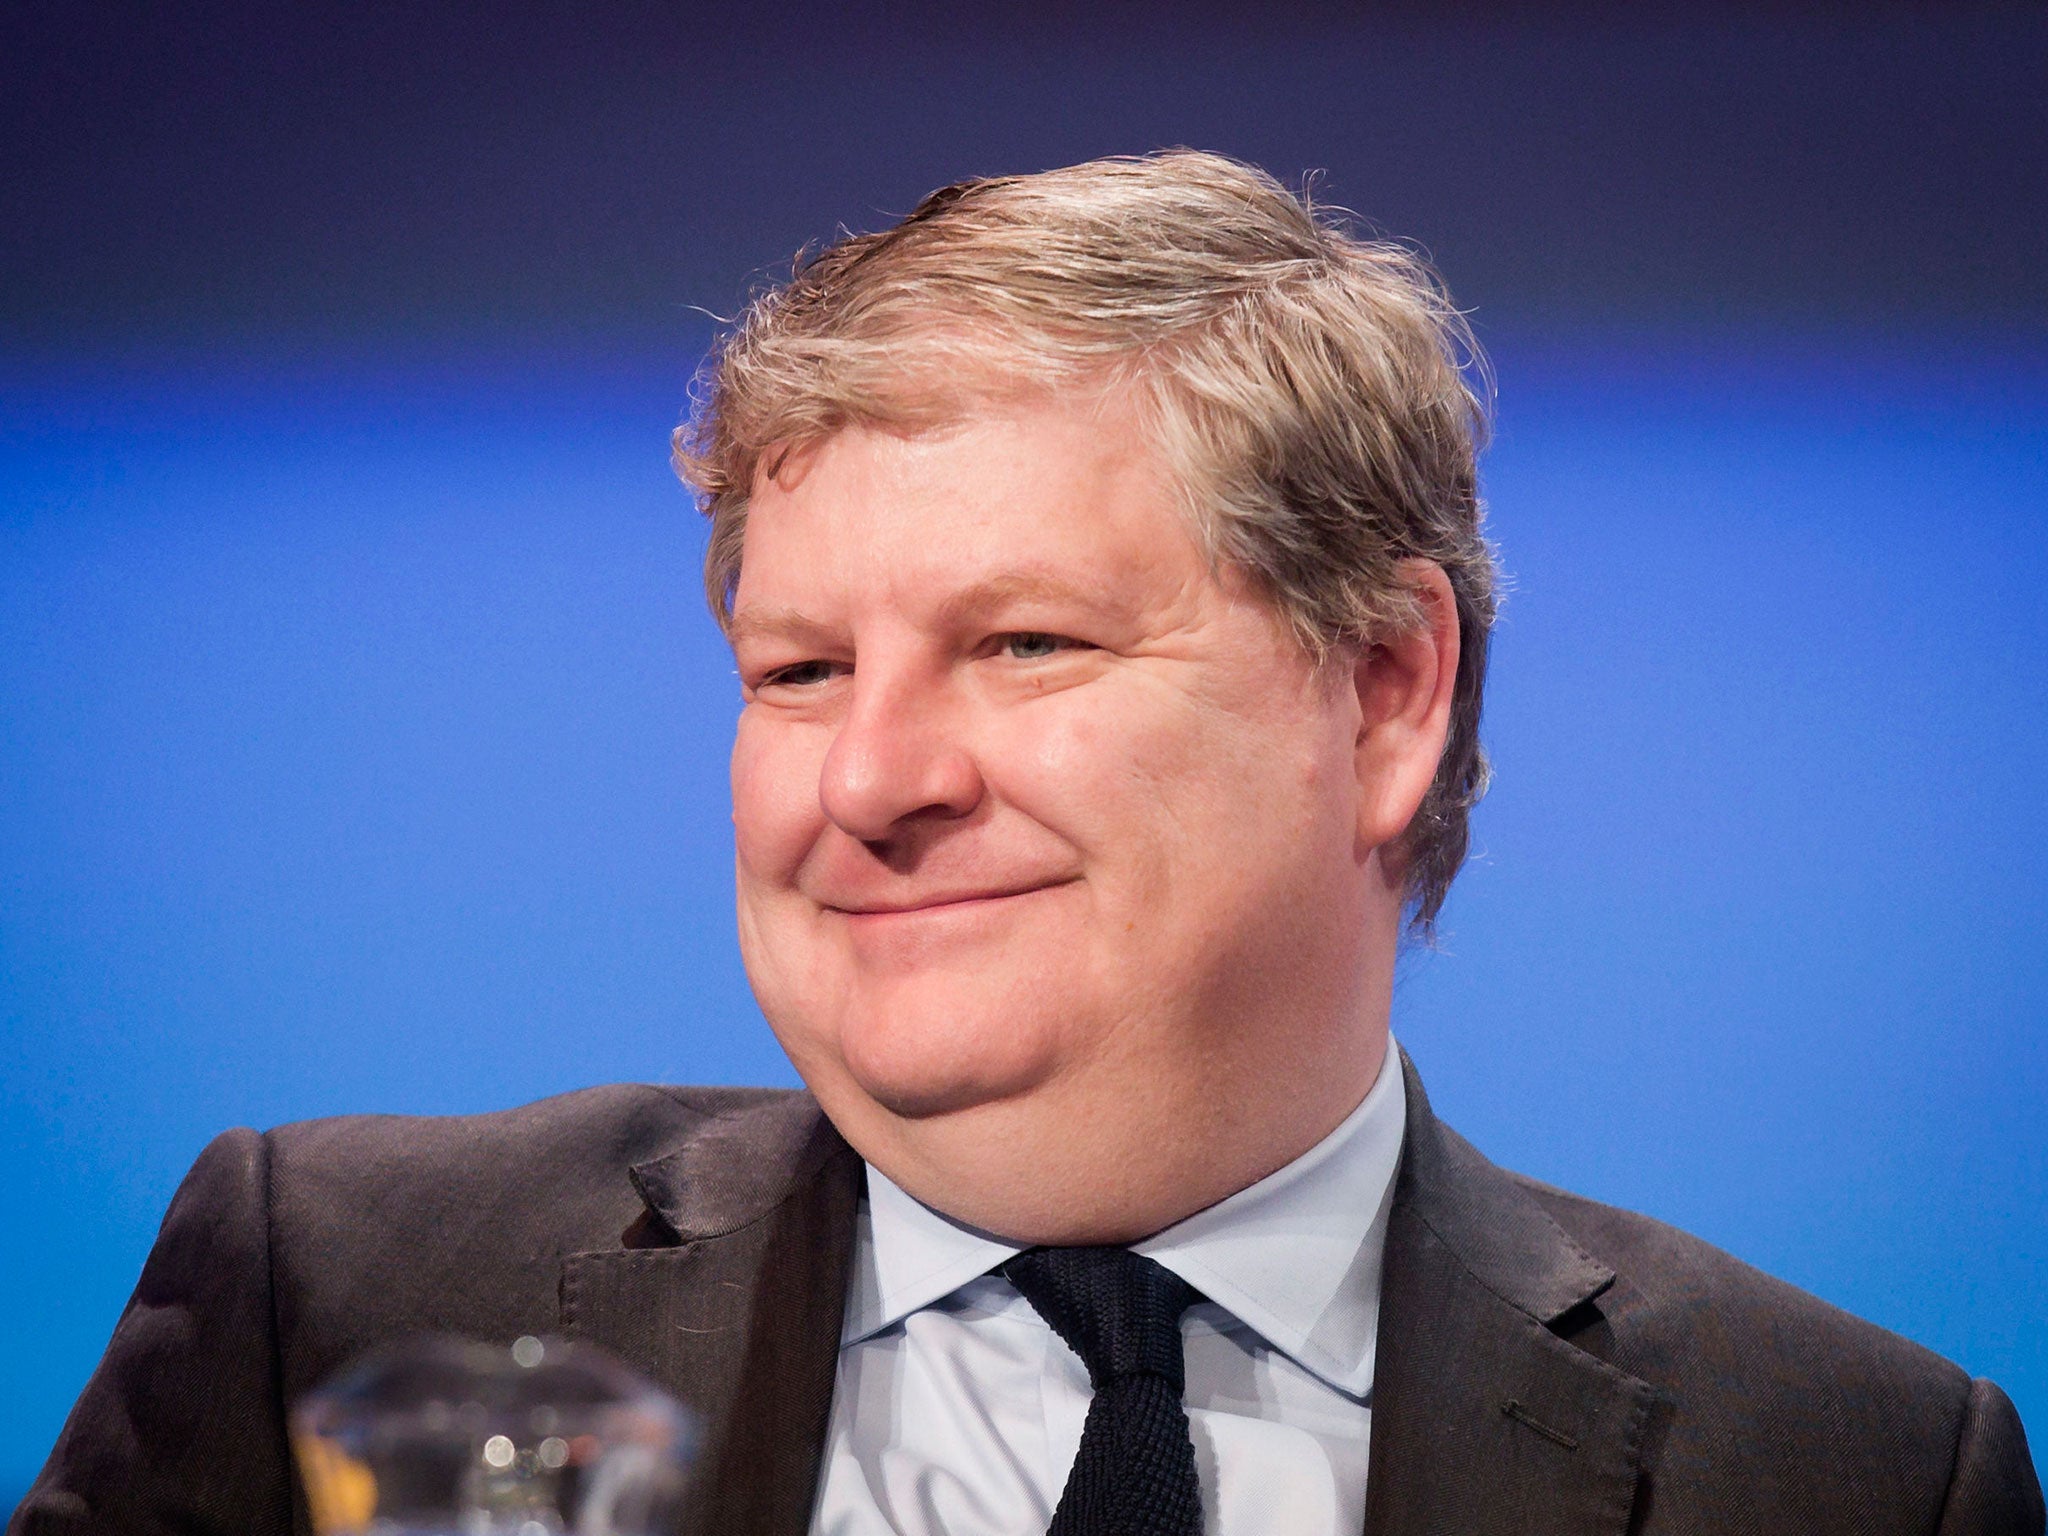 Angus Robertson said David Cameron’s promise to give Scots an 'equal voice' in the wake of the independence referendum would lie 'in tatters' if the Prime Minister did not allow each part of the UK its own say in the forthcoming in/out vote